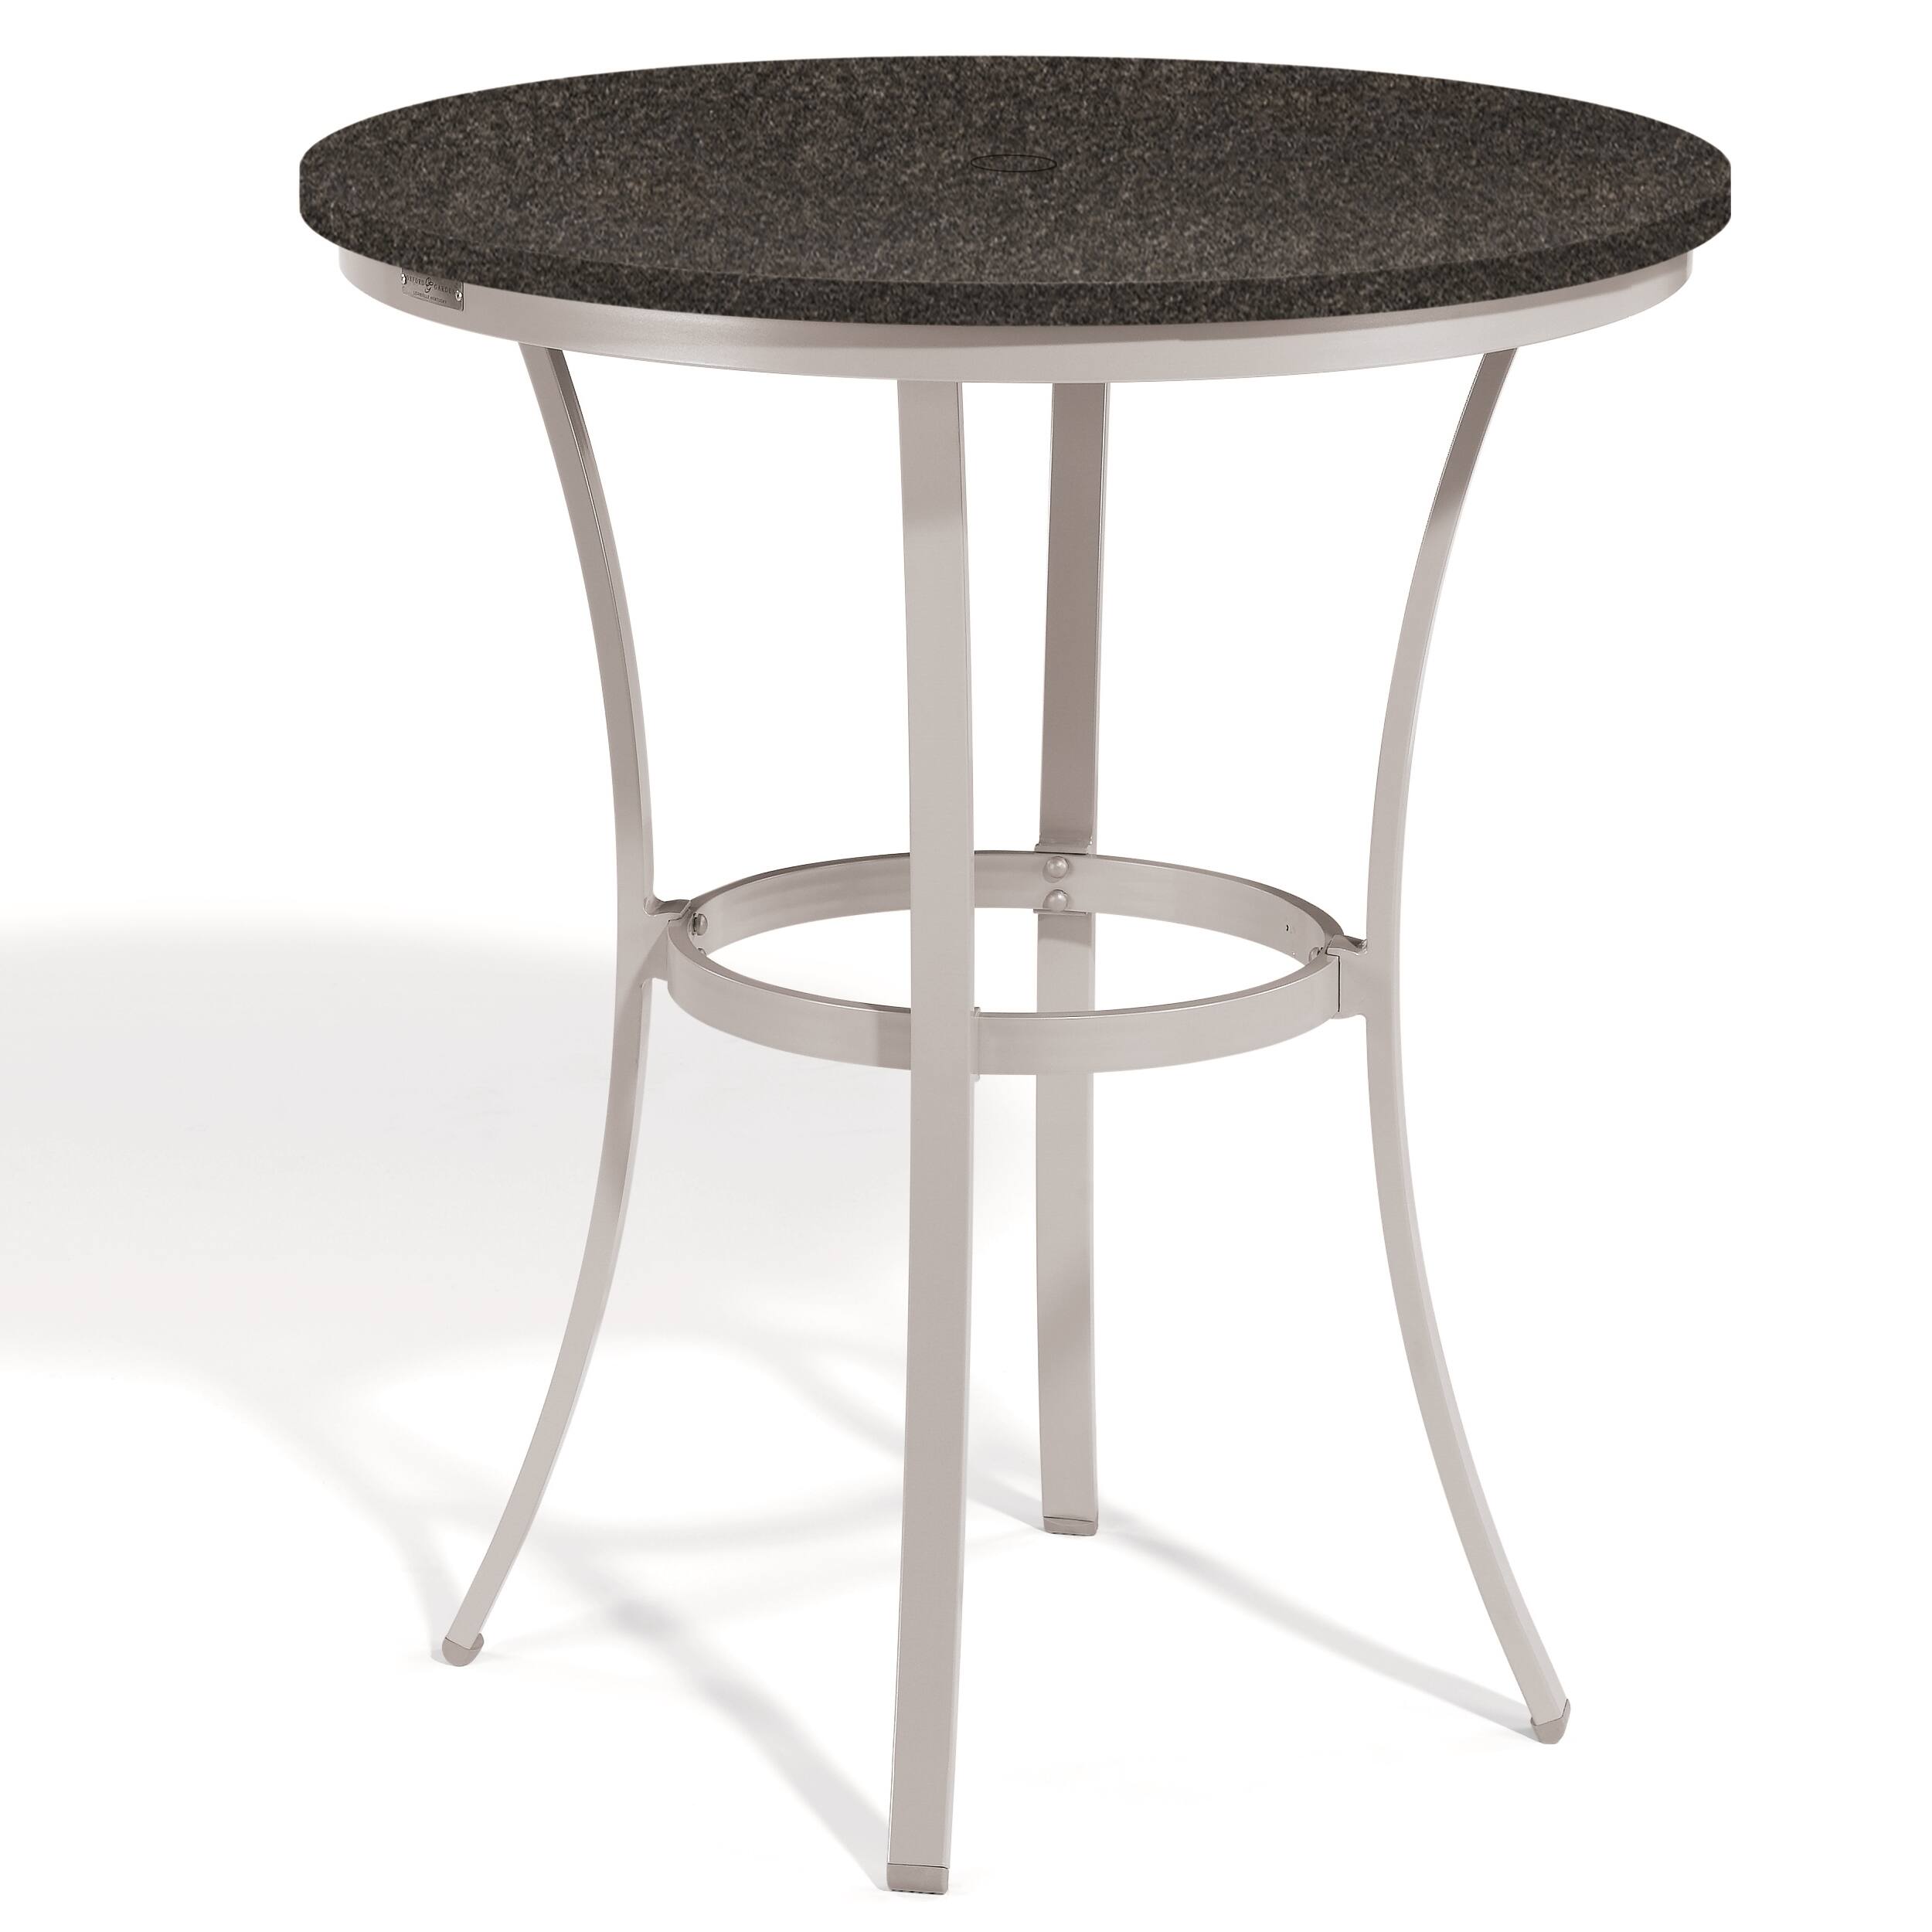 Oxford Garden Travira 36-inch Round Lite-Core Granite Charcoal Cafe Bar Table with Powder Coated Aluminum Frame